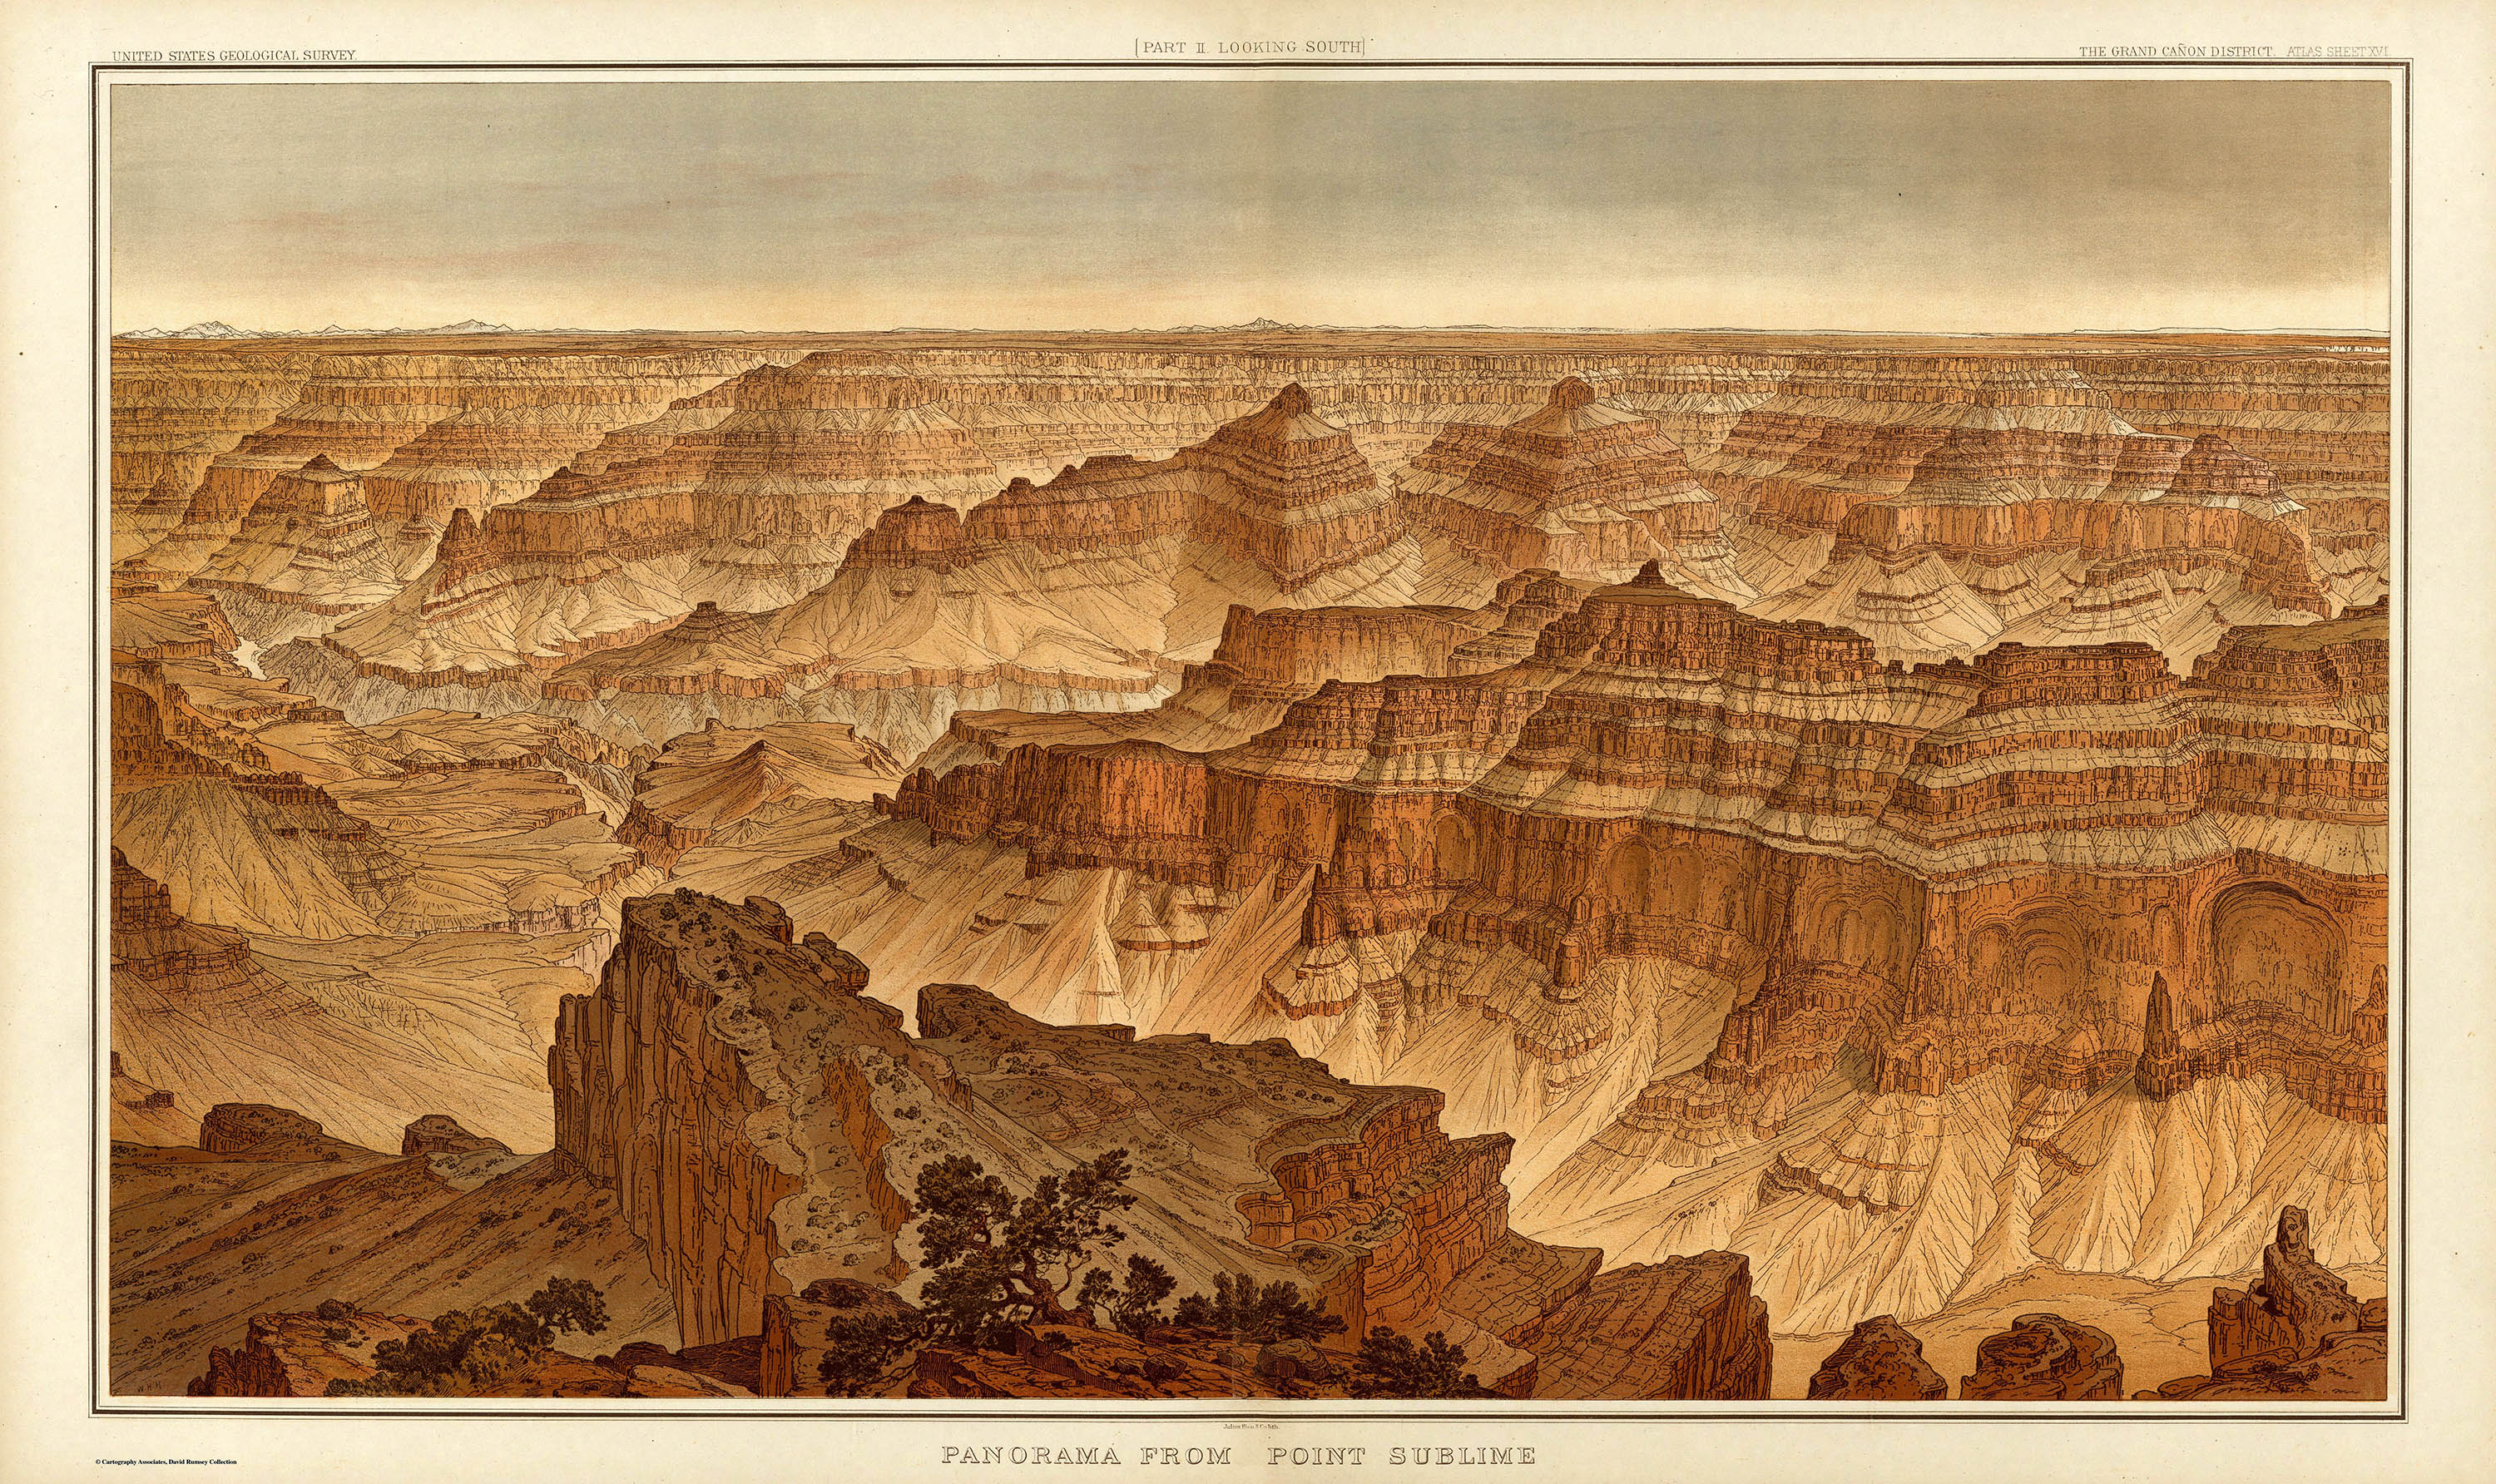 Panorama print showing the horizontal red layered rocks and broad, intricately sculptured chasm of the canyon.